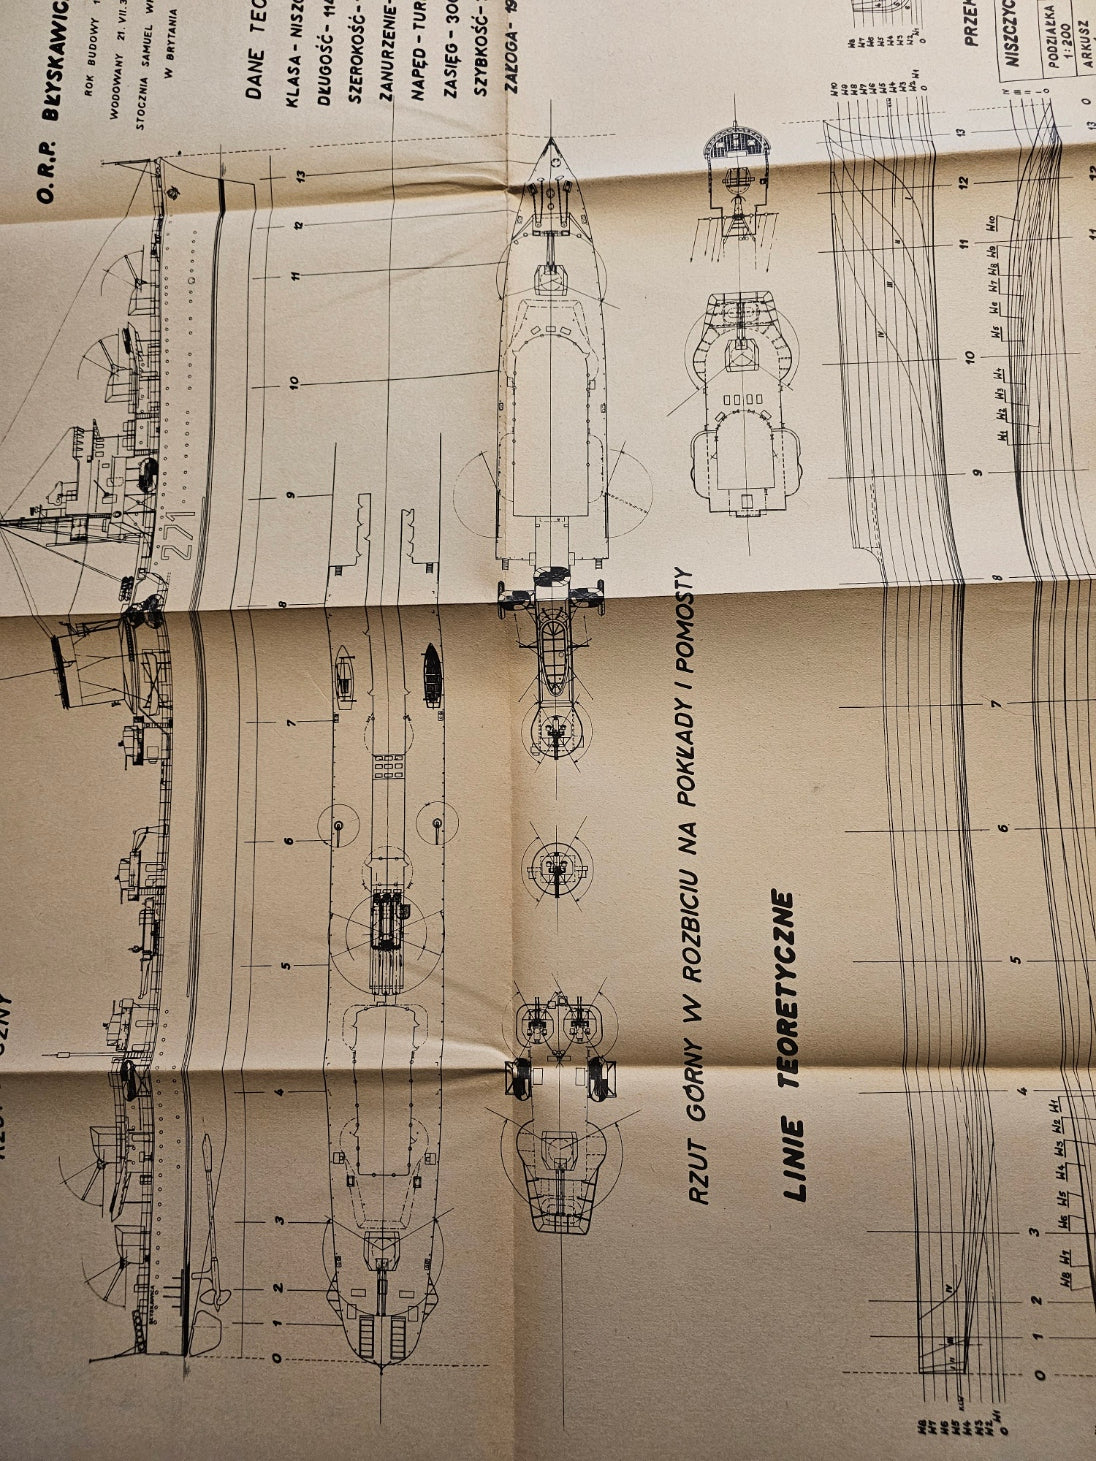 Vintage 1973 construction plans for ORP Blyskawica & ORP Garland by LOK Publishing, showing the authentic discoloration and condition of the paper.